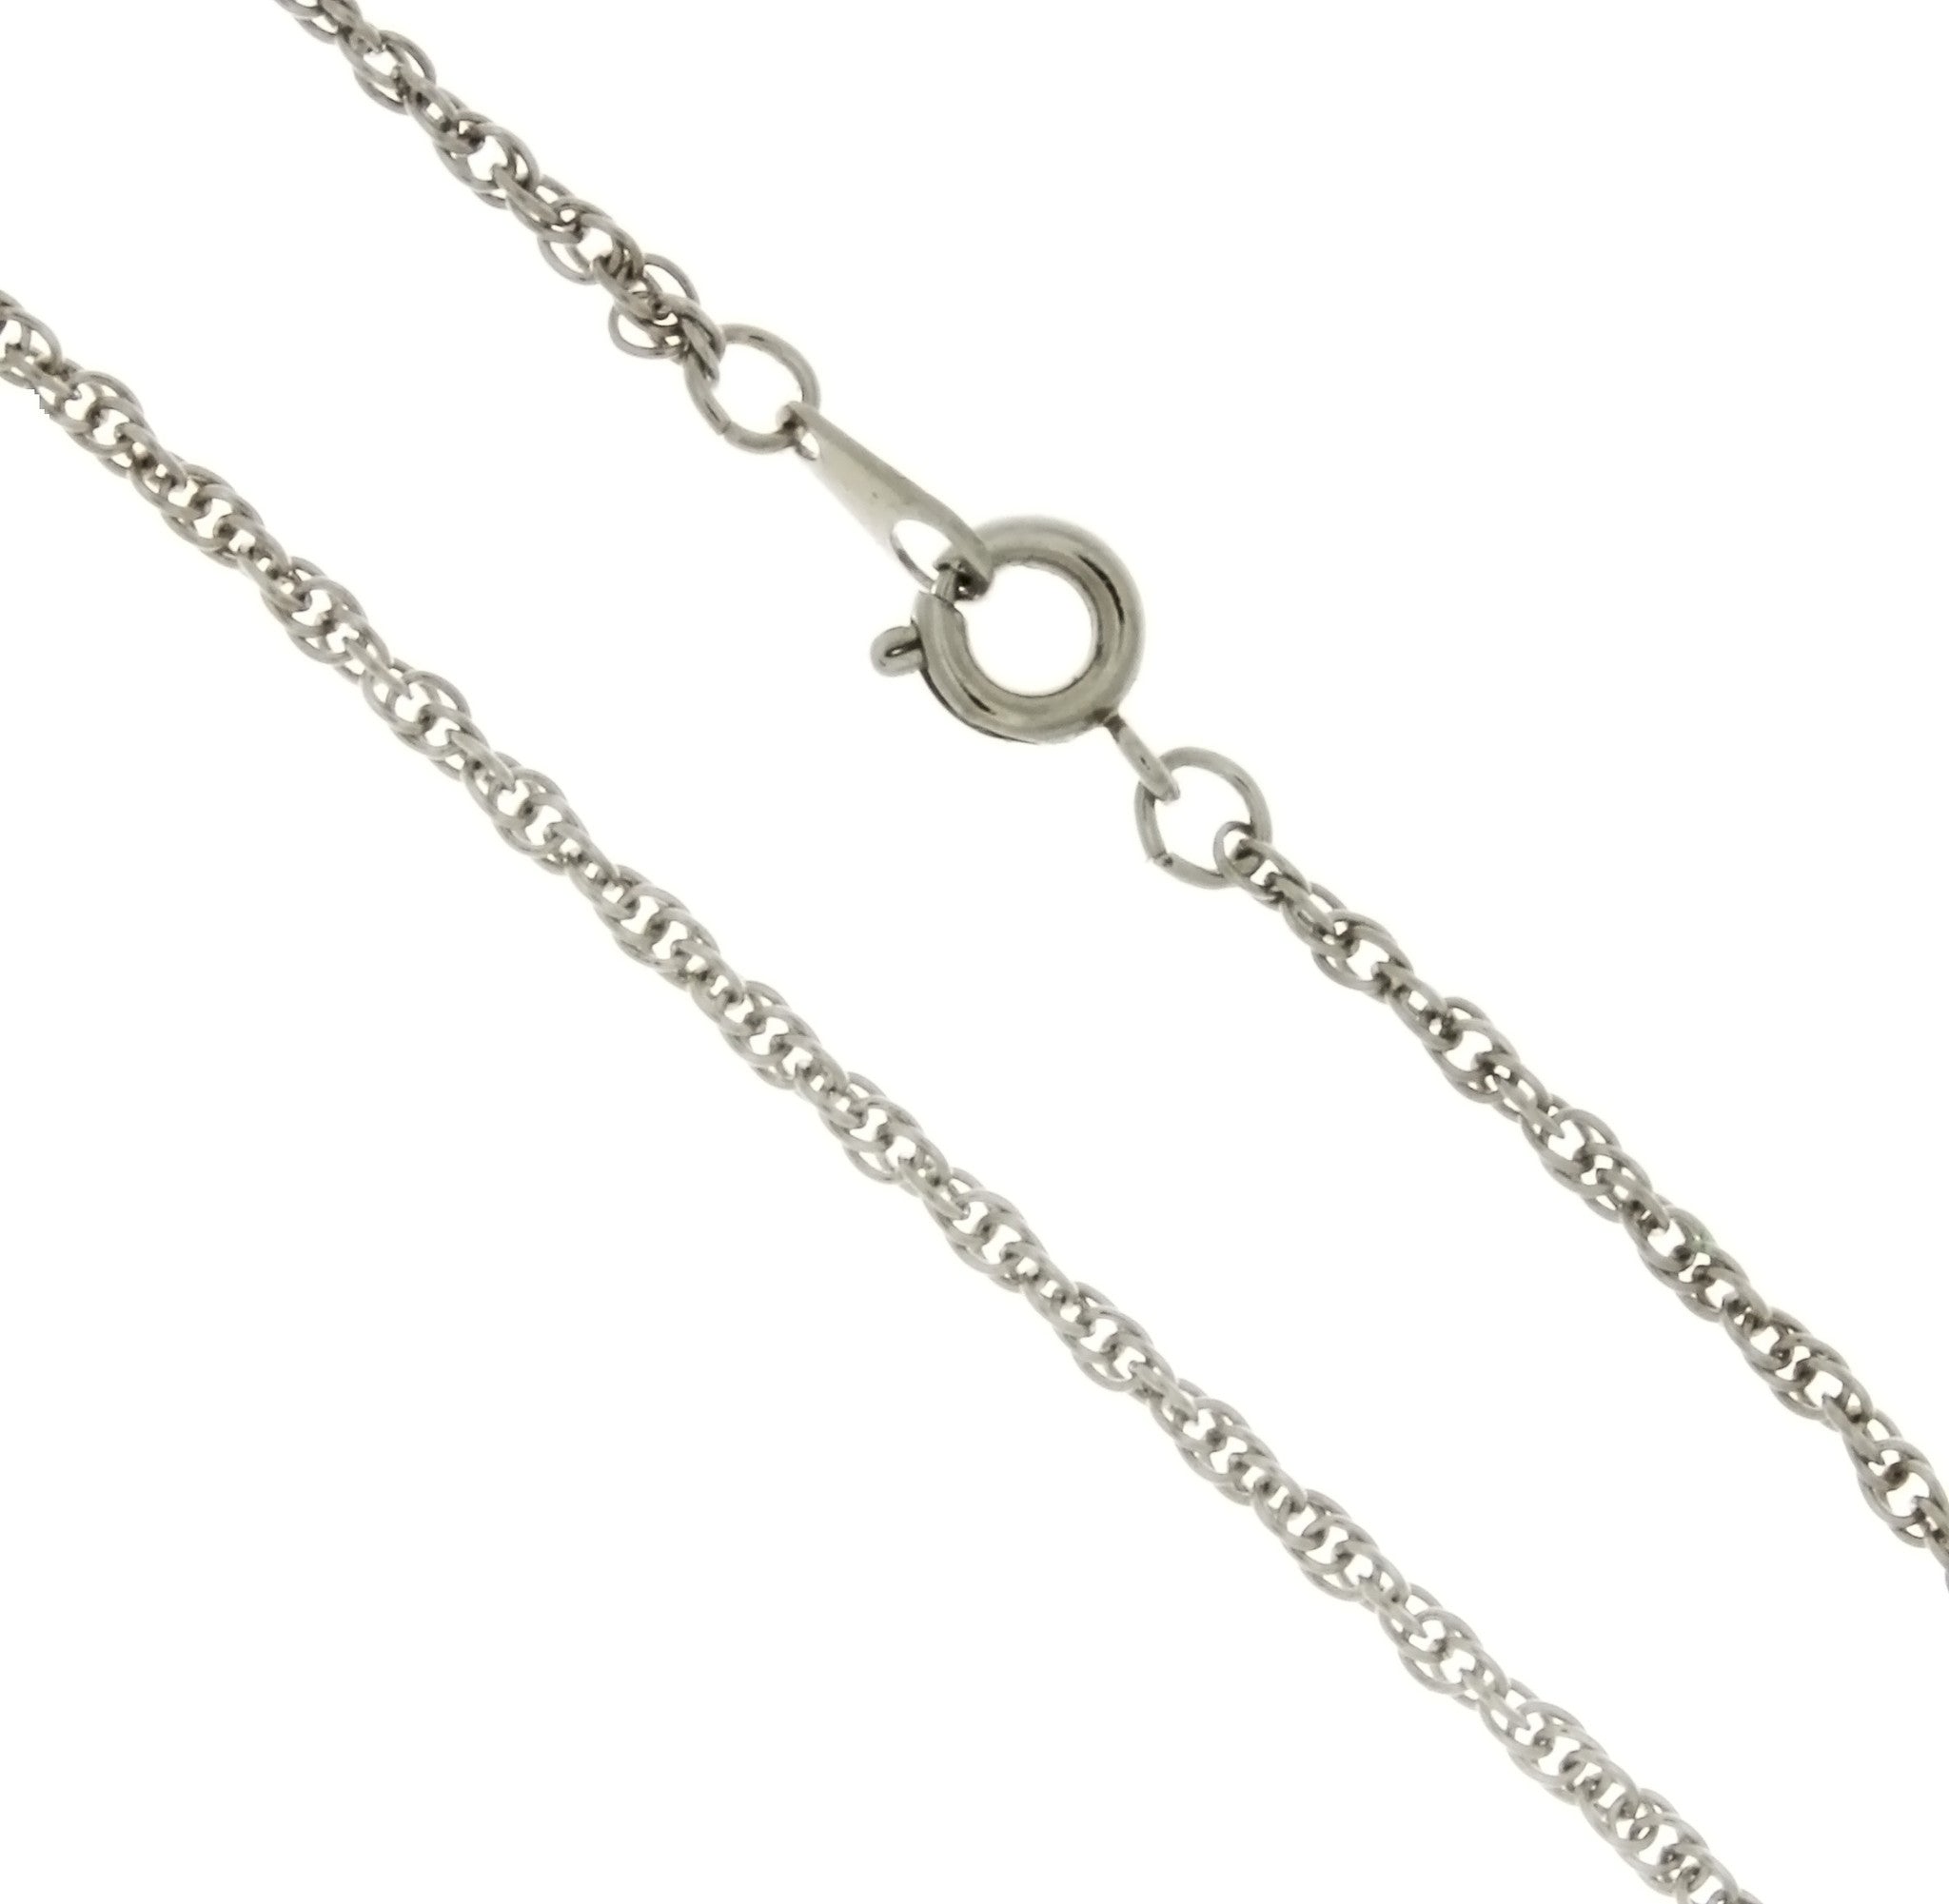 CHAIN NECKLACE ROPE SILVER 1.9 MM X 24 IN (DOZ)